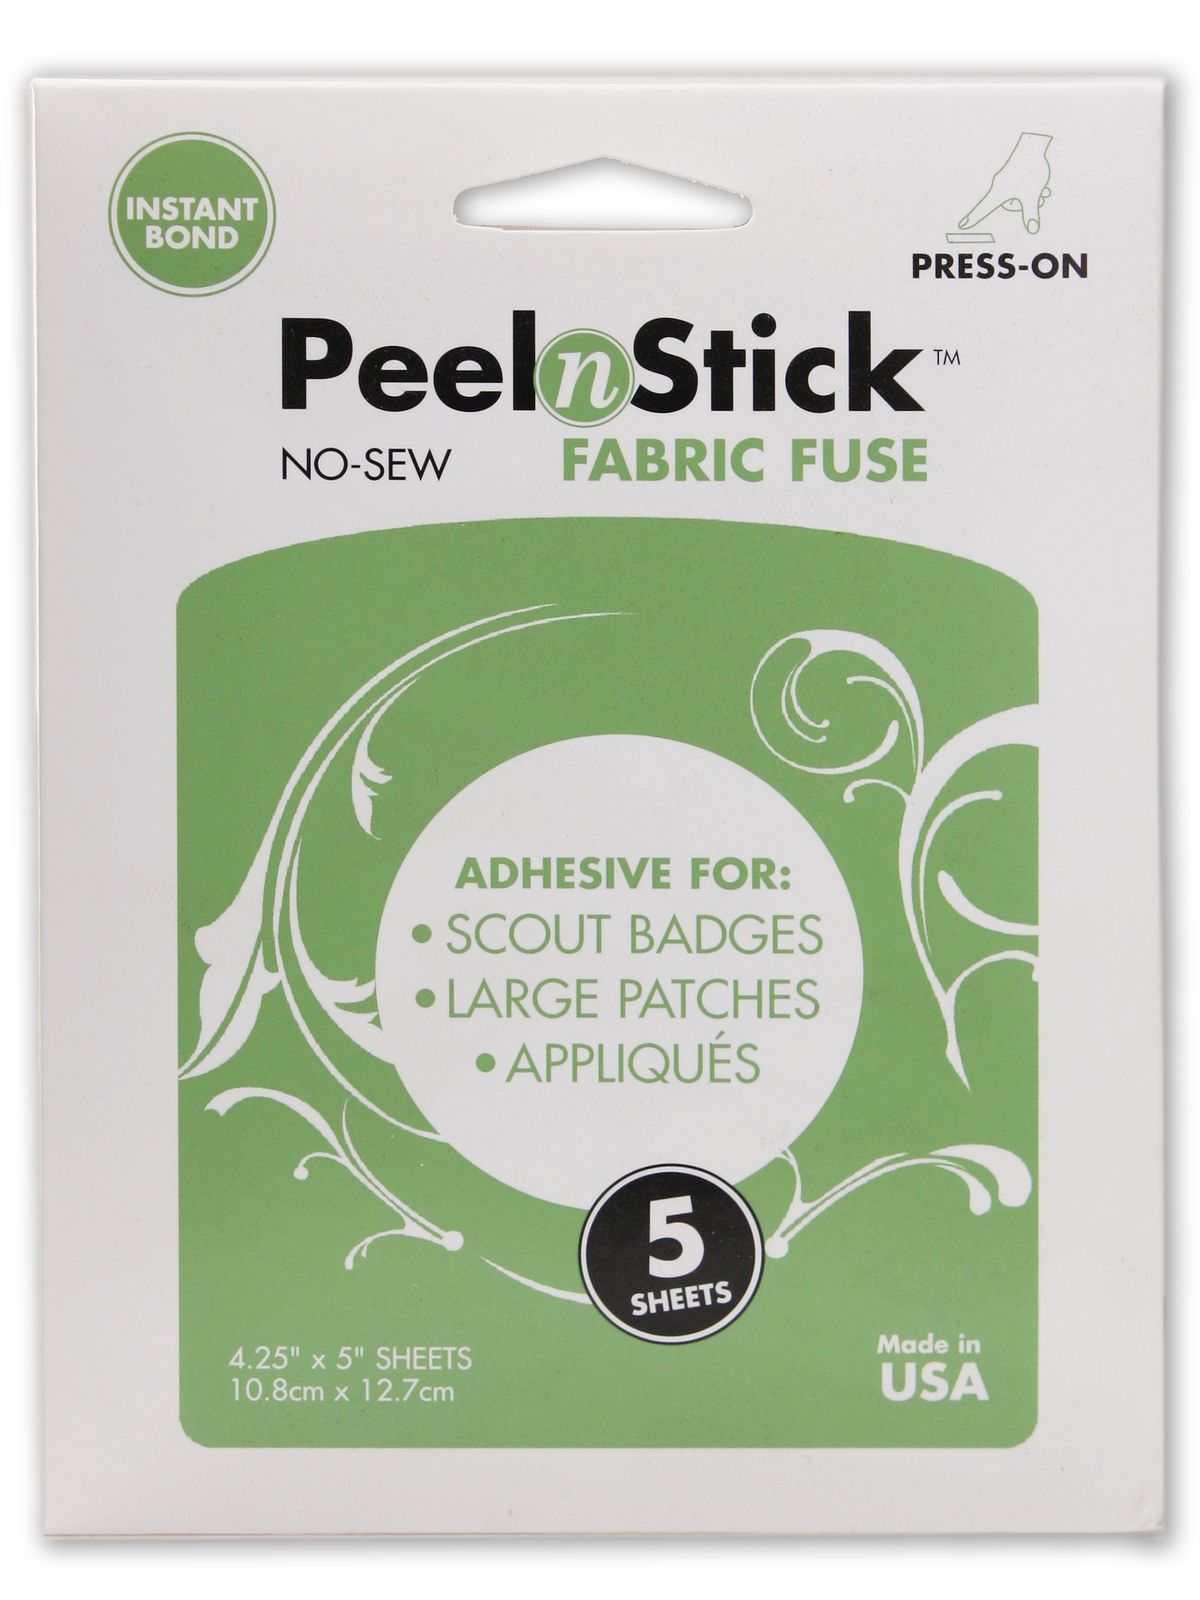 Fabric Fuse Adhesive Pack Of 5 Sheets